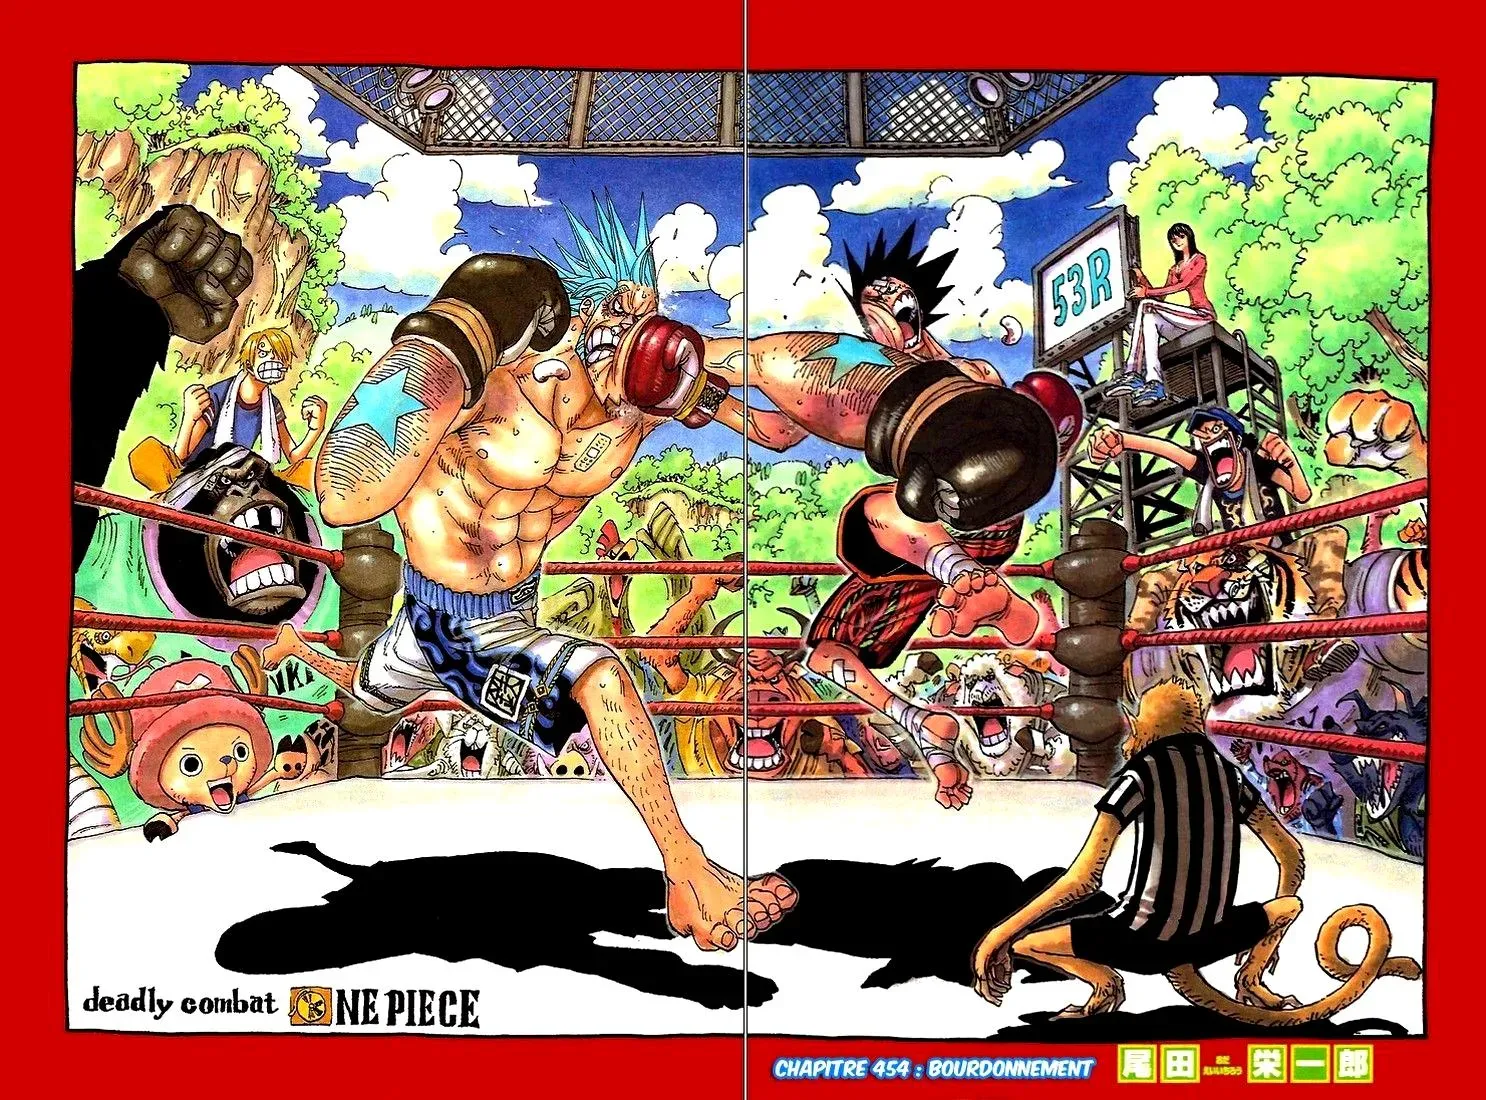 One Piece: Chapter chapitre-454 - Page 1